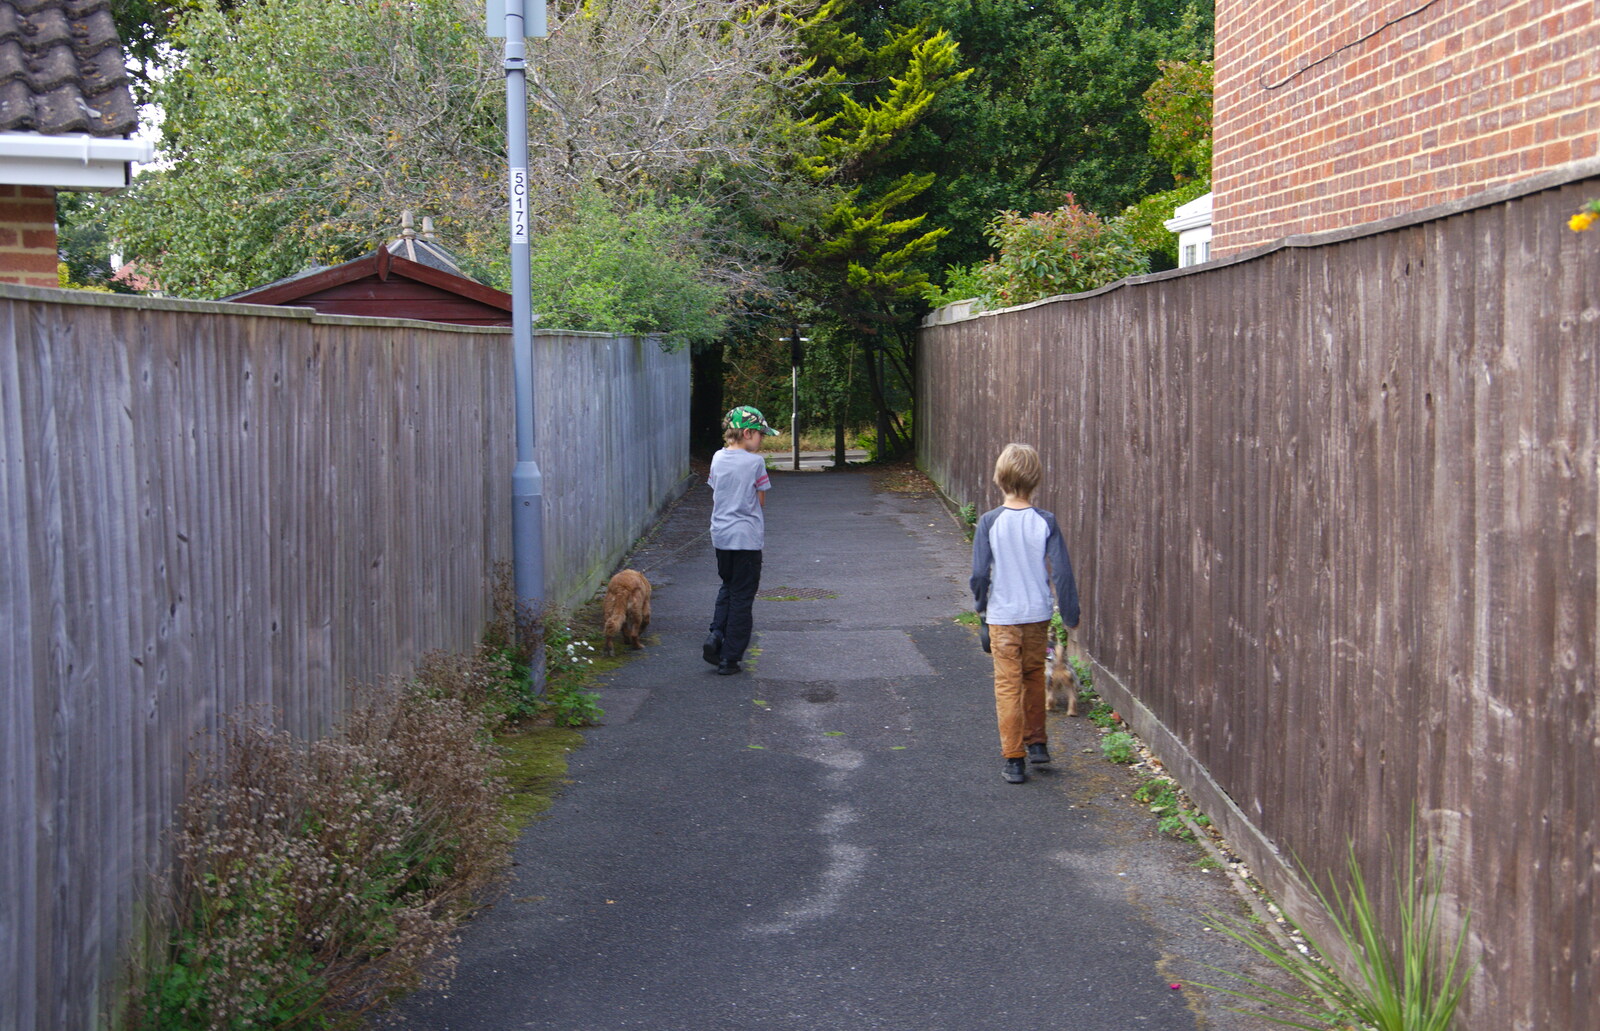 There's an alley cutting back to Lymington Road from A Day with Sean and Michelle, Walkford, Dorset - 21st September 2019